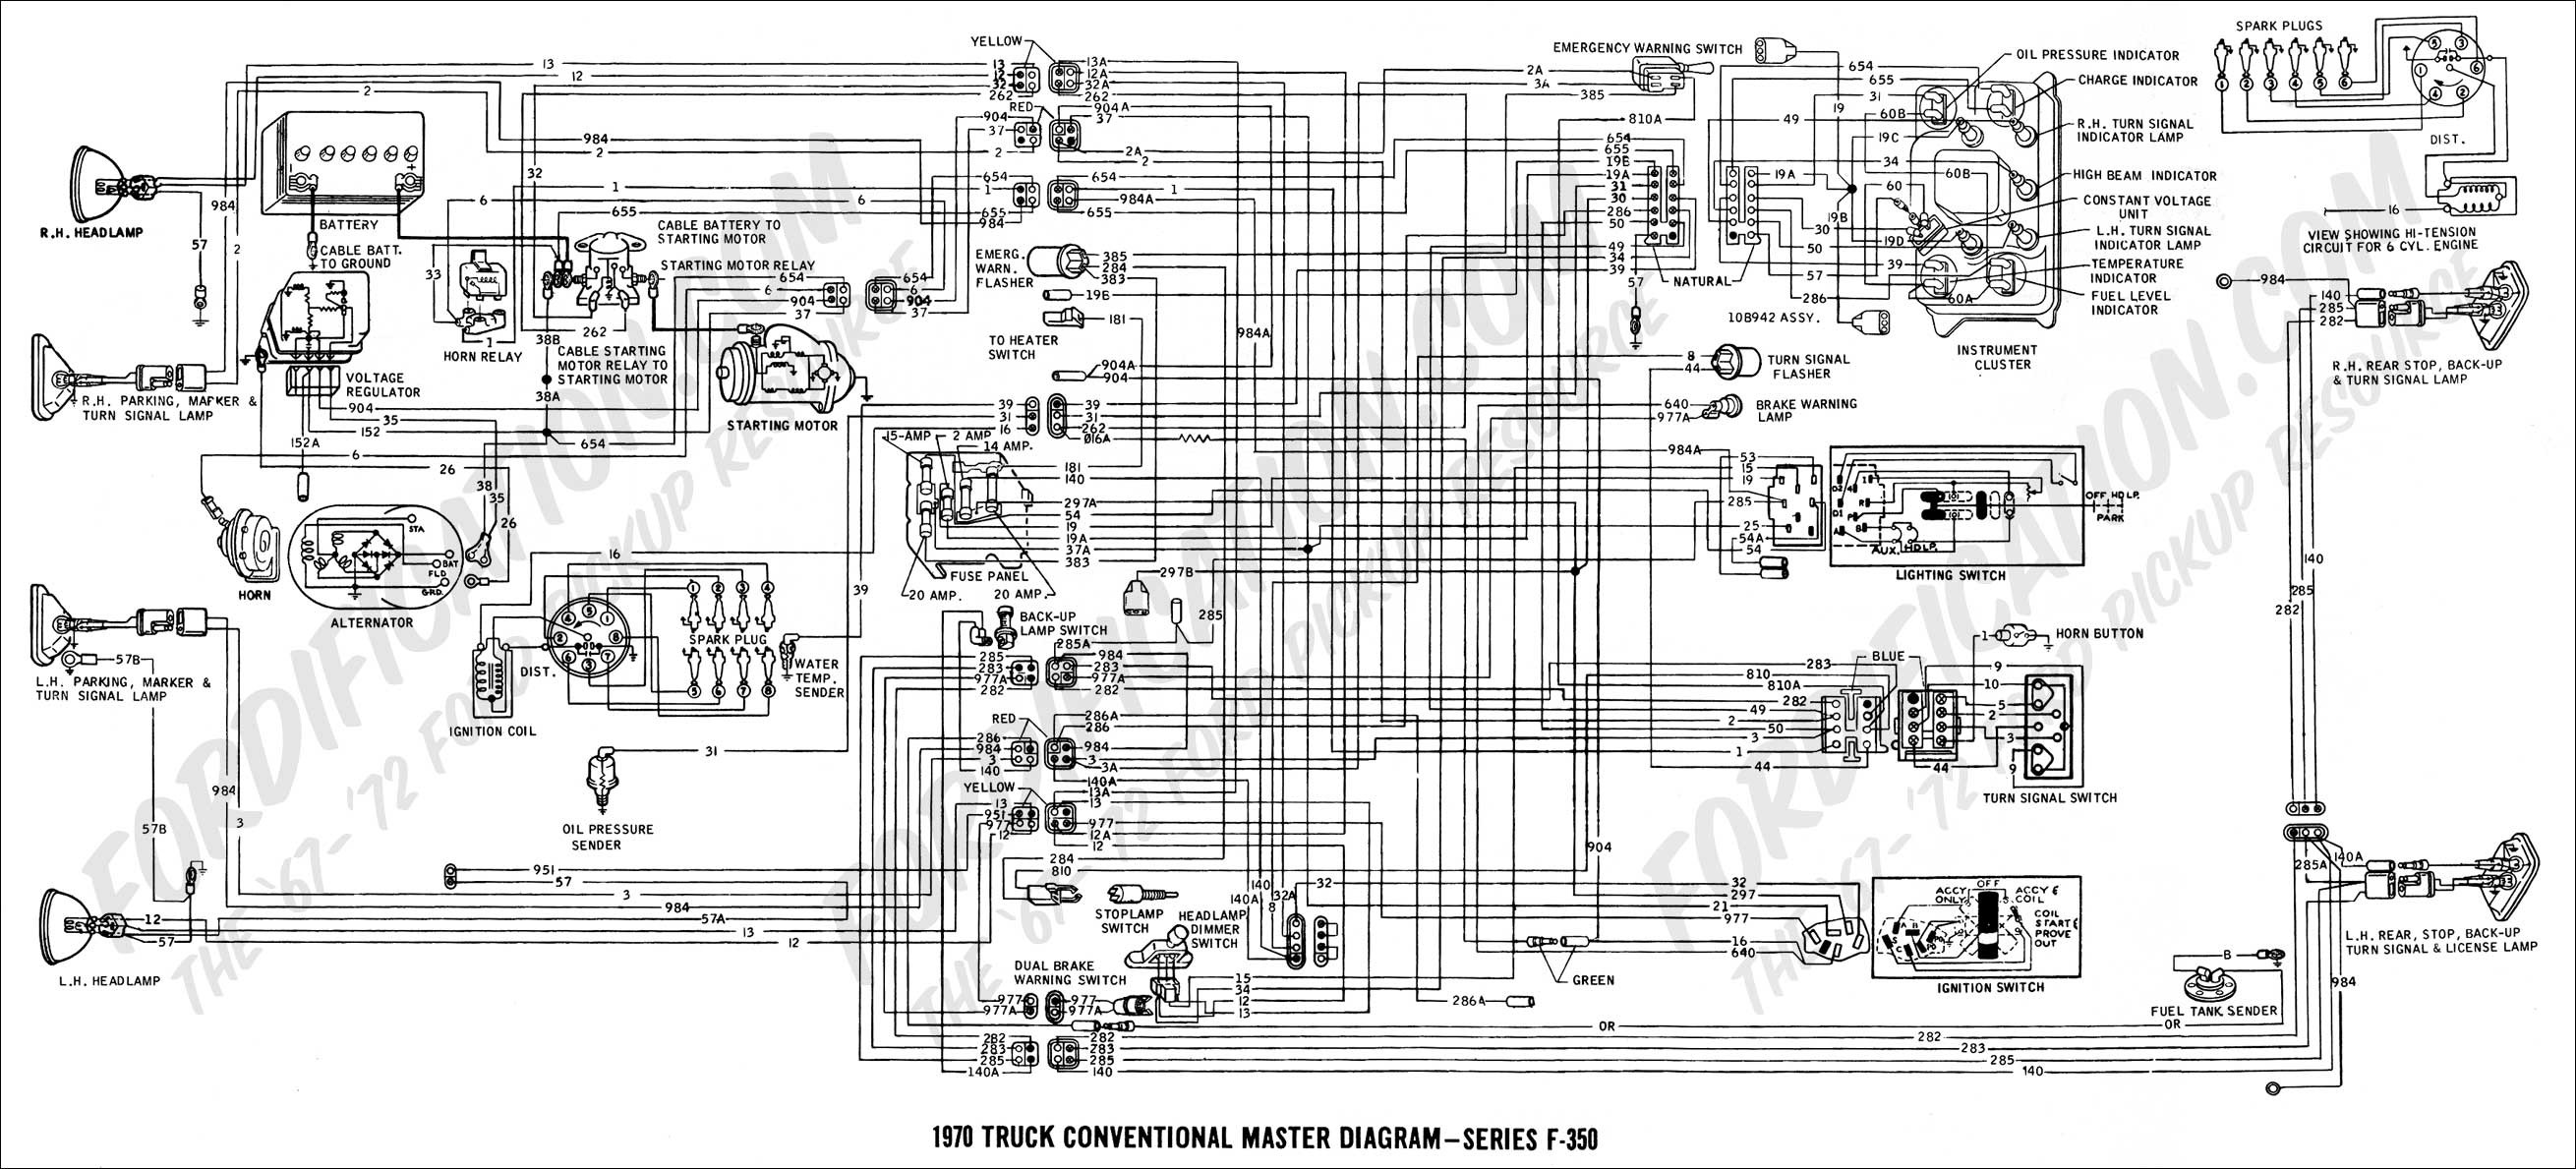 Basic Engine Wiring Diagram Diagram as Well ford F 350 Wiring Diagram In Addition ford Headlight